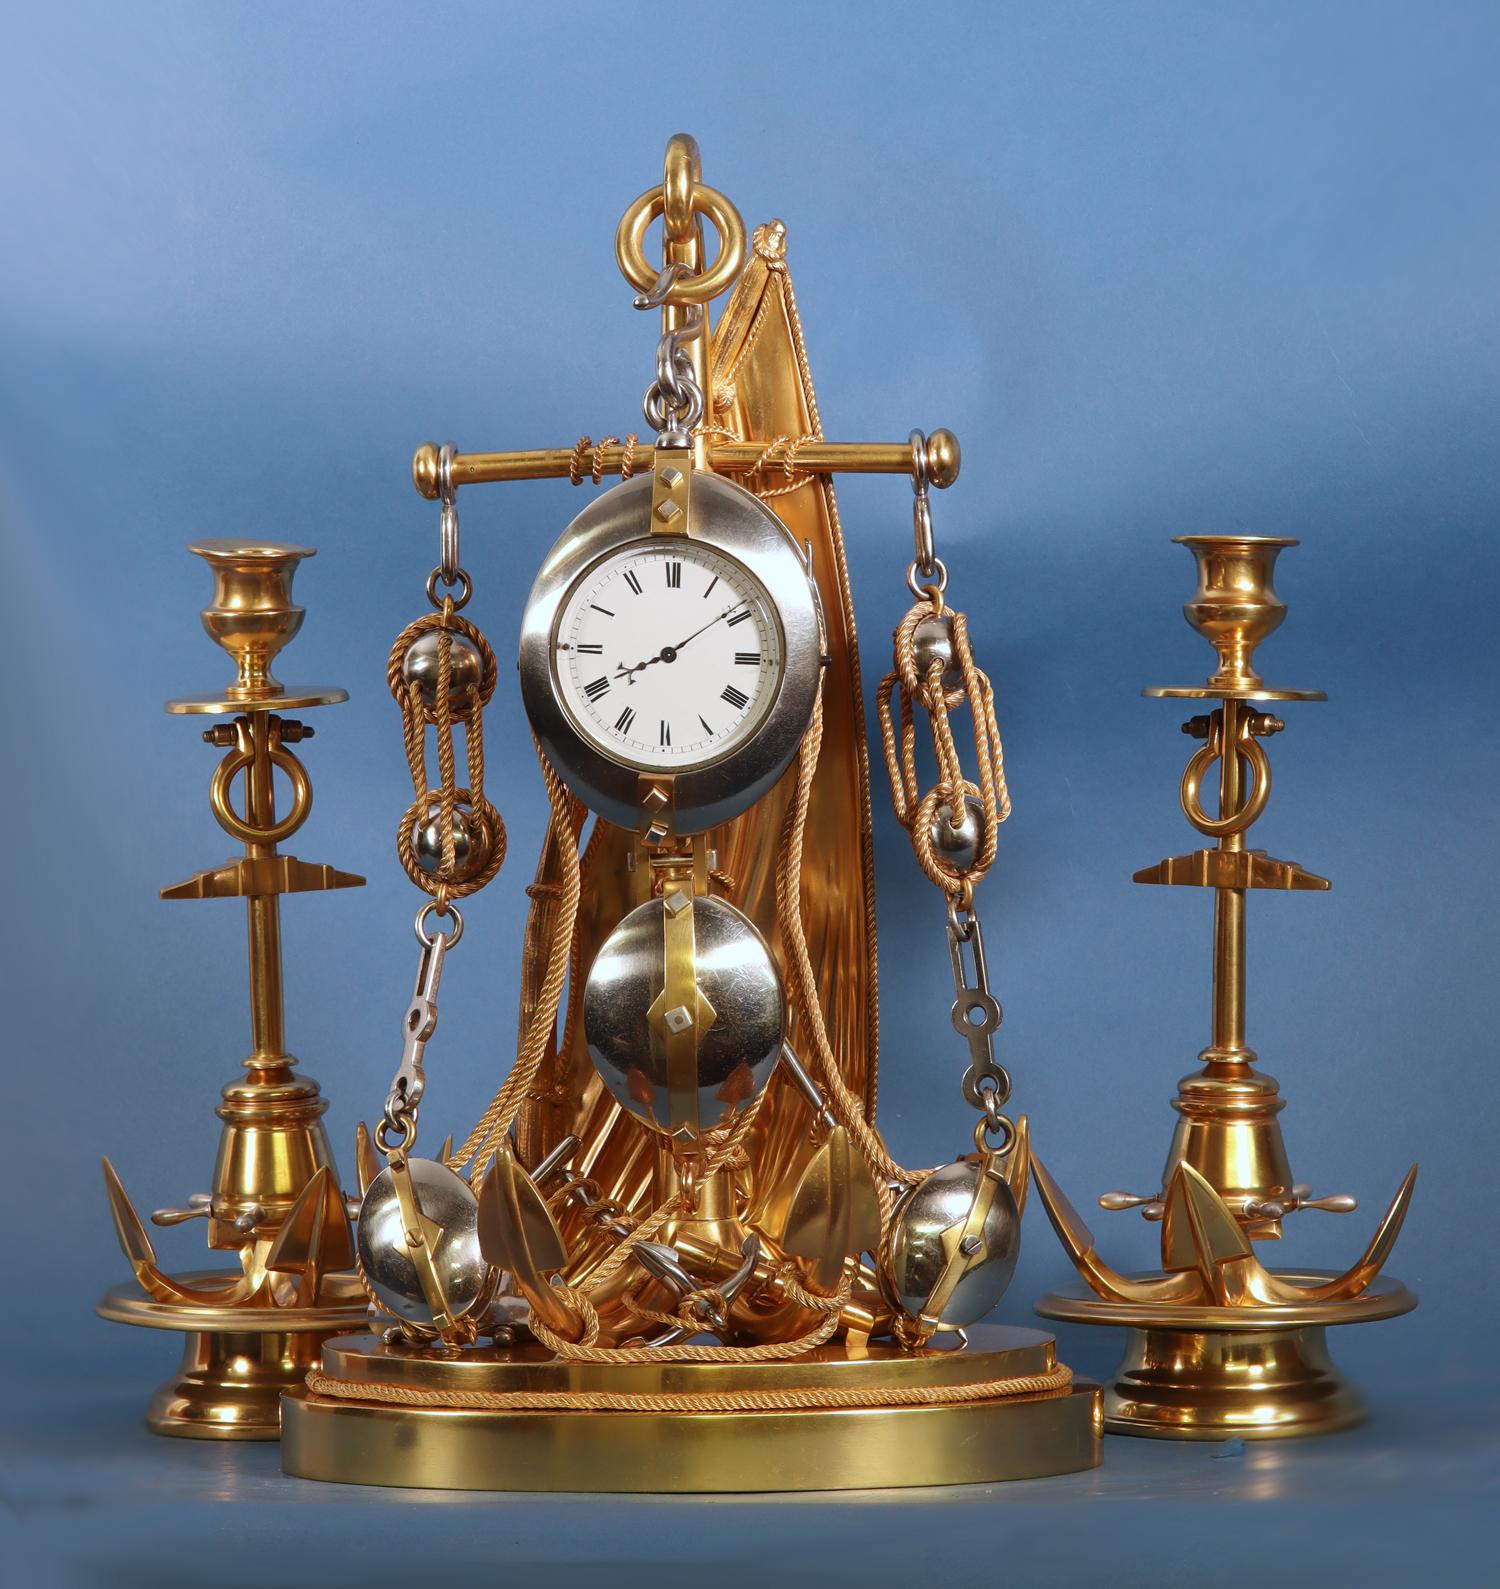 Rare gilt and silvered-bronze nautically themed mantle clock with the original side-pieces. It is composed of various ship inspired components that include a sail, anchors, block and tackles and twisting ropes. Both the clock and sidepieces are also